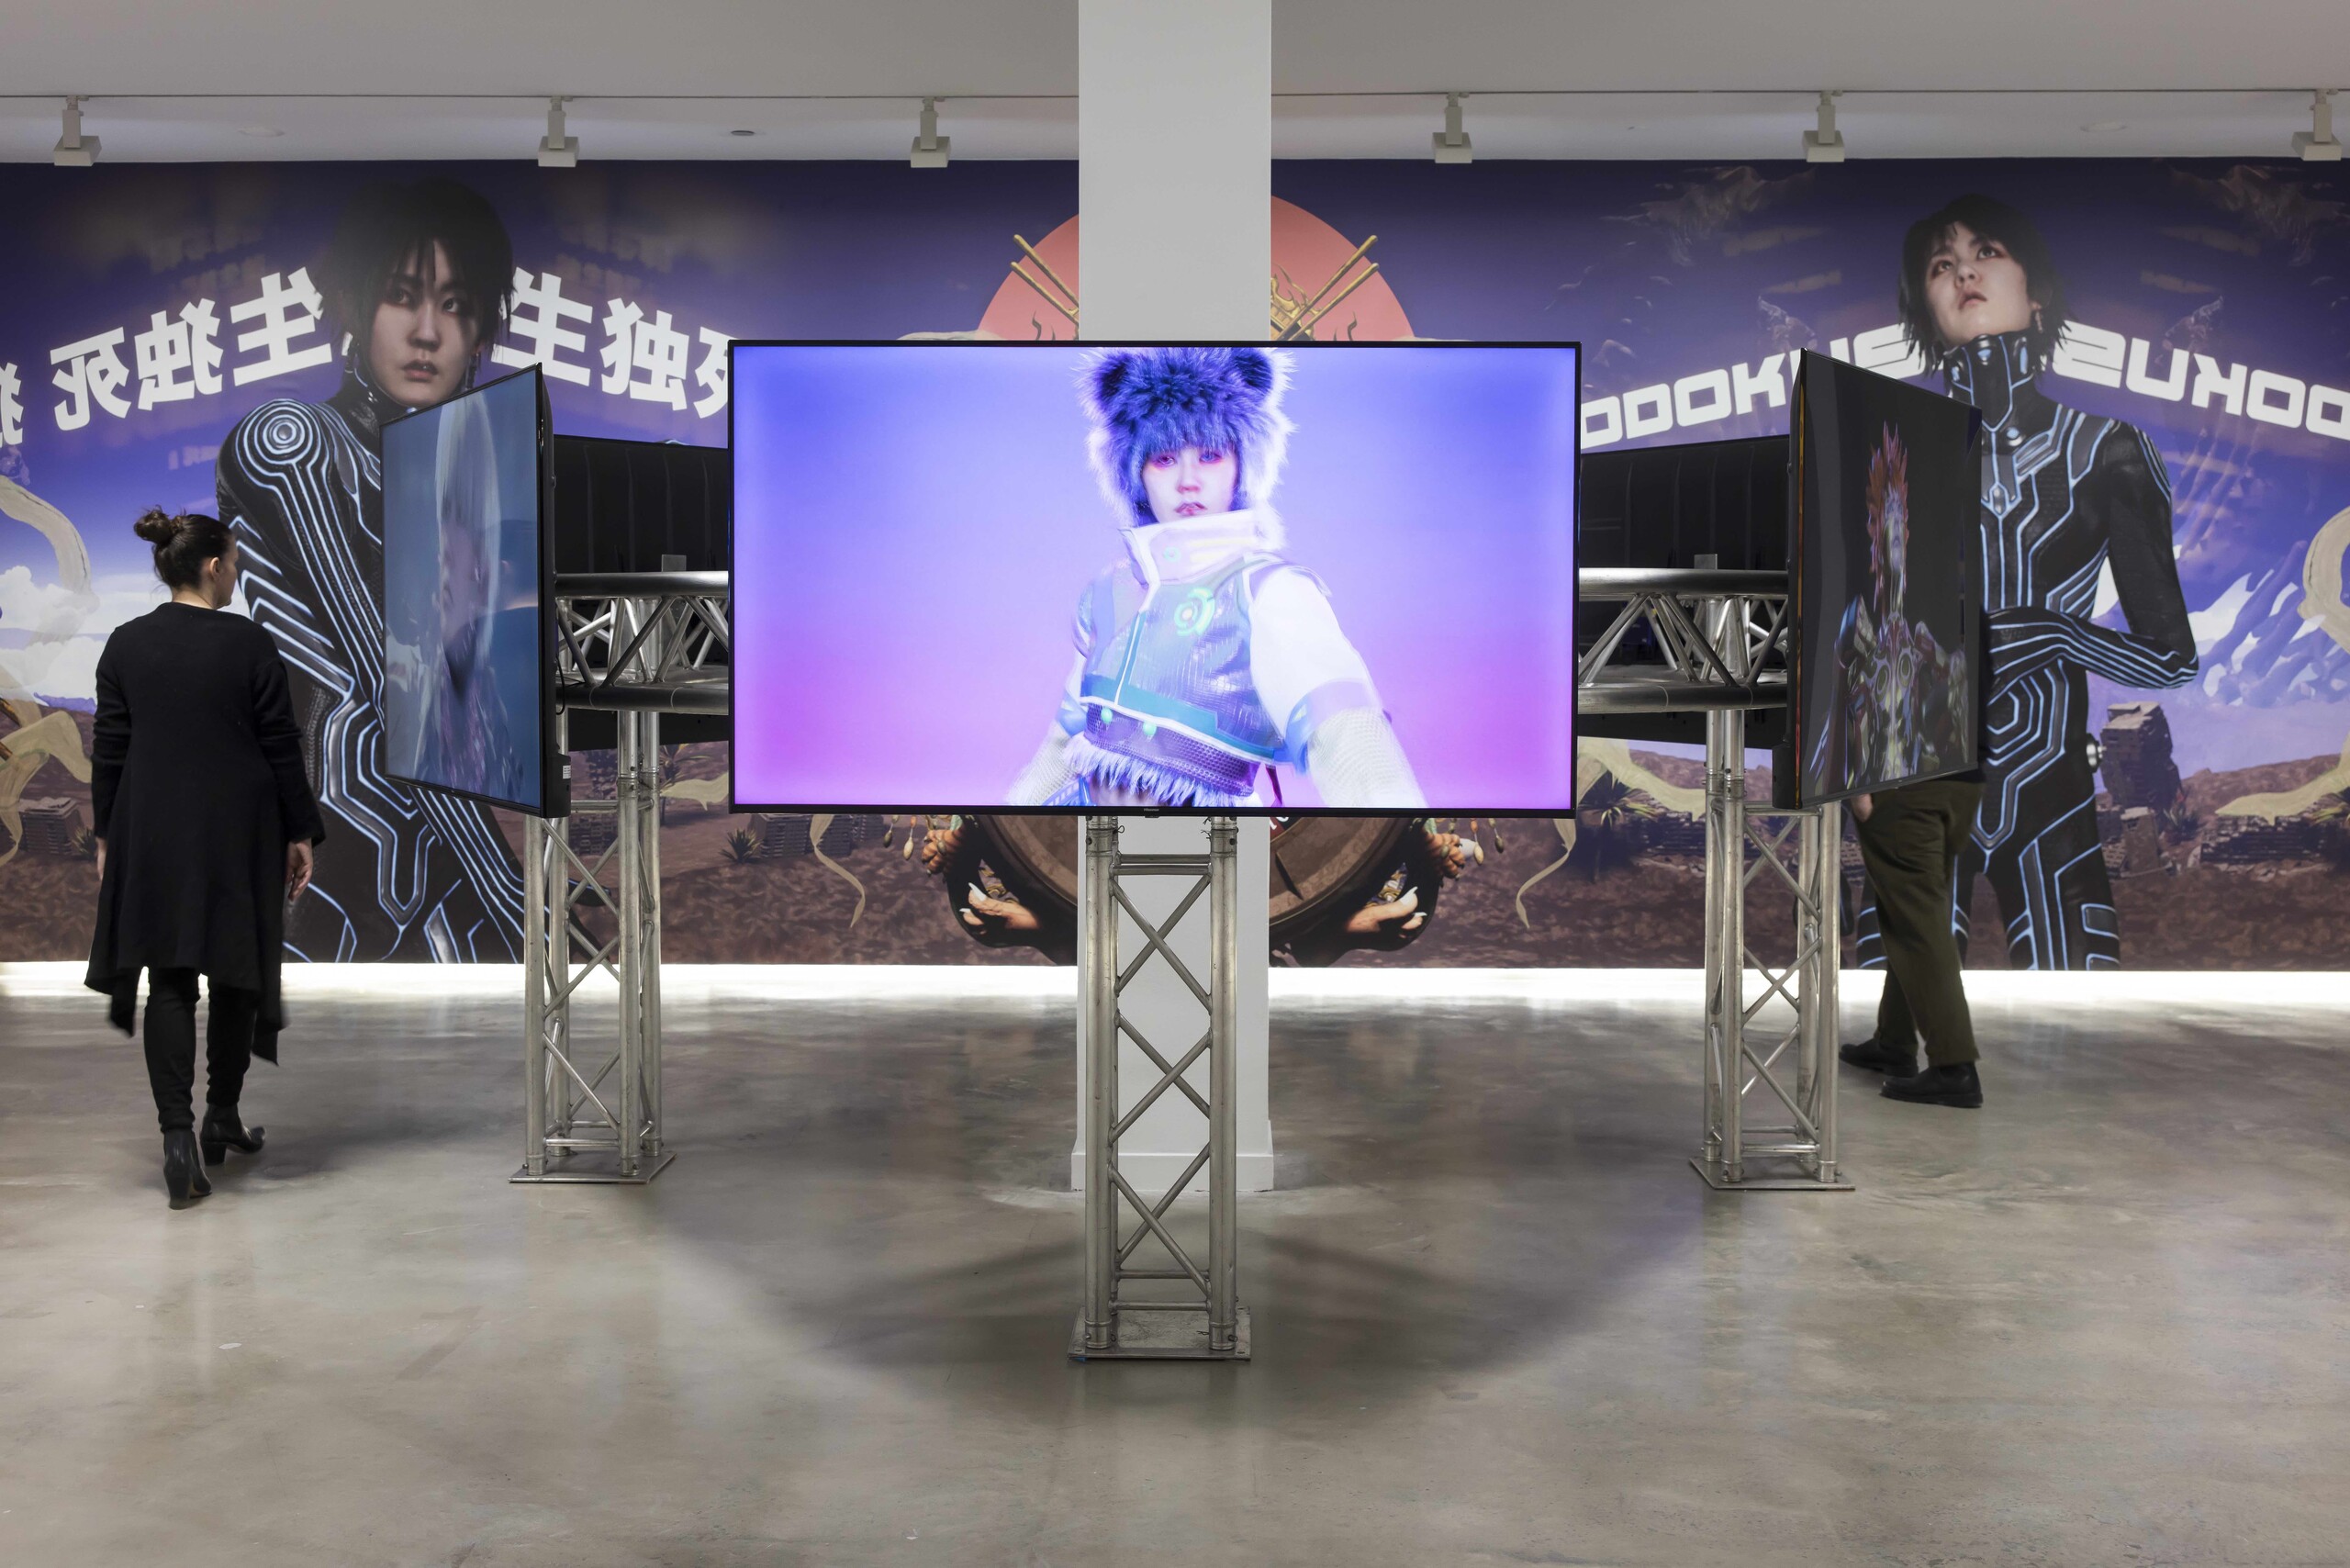 Lu Yang, installation view, Ultra Unreal, Museum of Contemporary Art Australia, Sydney, 2022, image courtesy and © the artist, photograph: Alex Davies